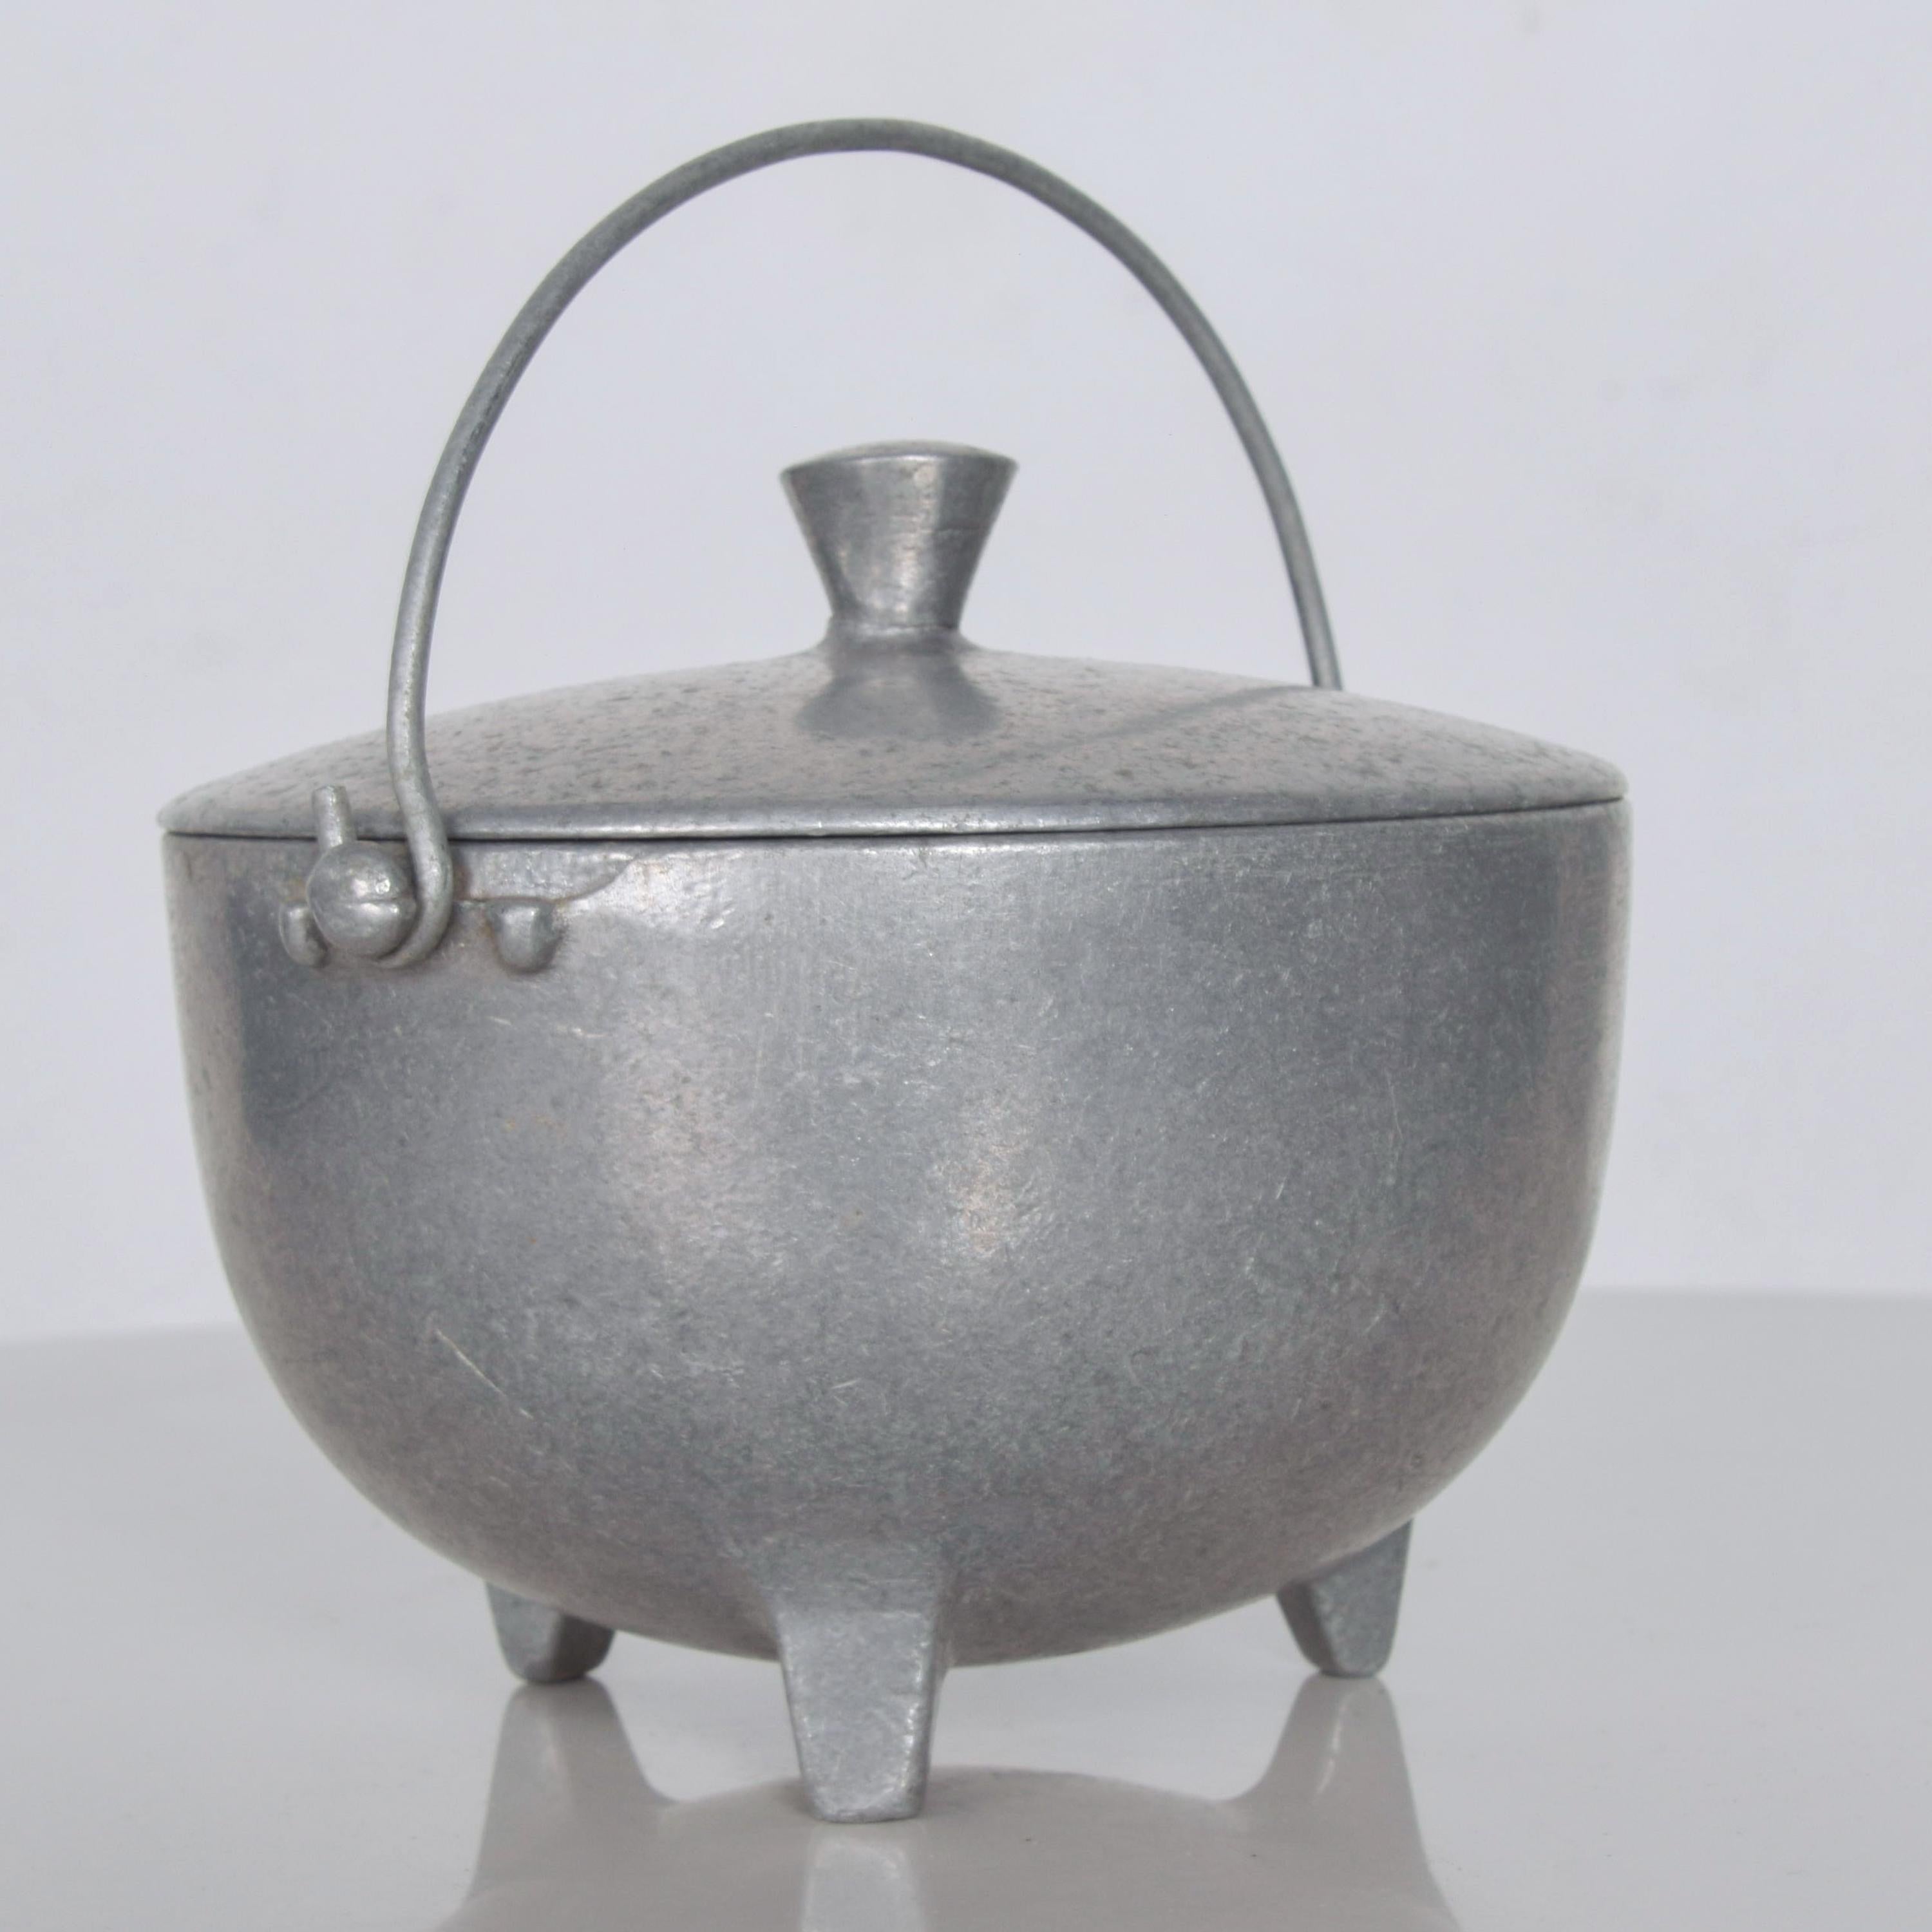 American 1970s Sculpted Aluminum Kettle Pot & Lid Footed Design Industrial Minalloy NYC